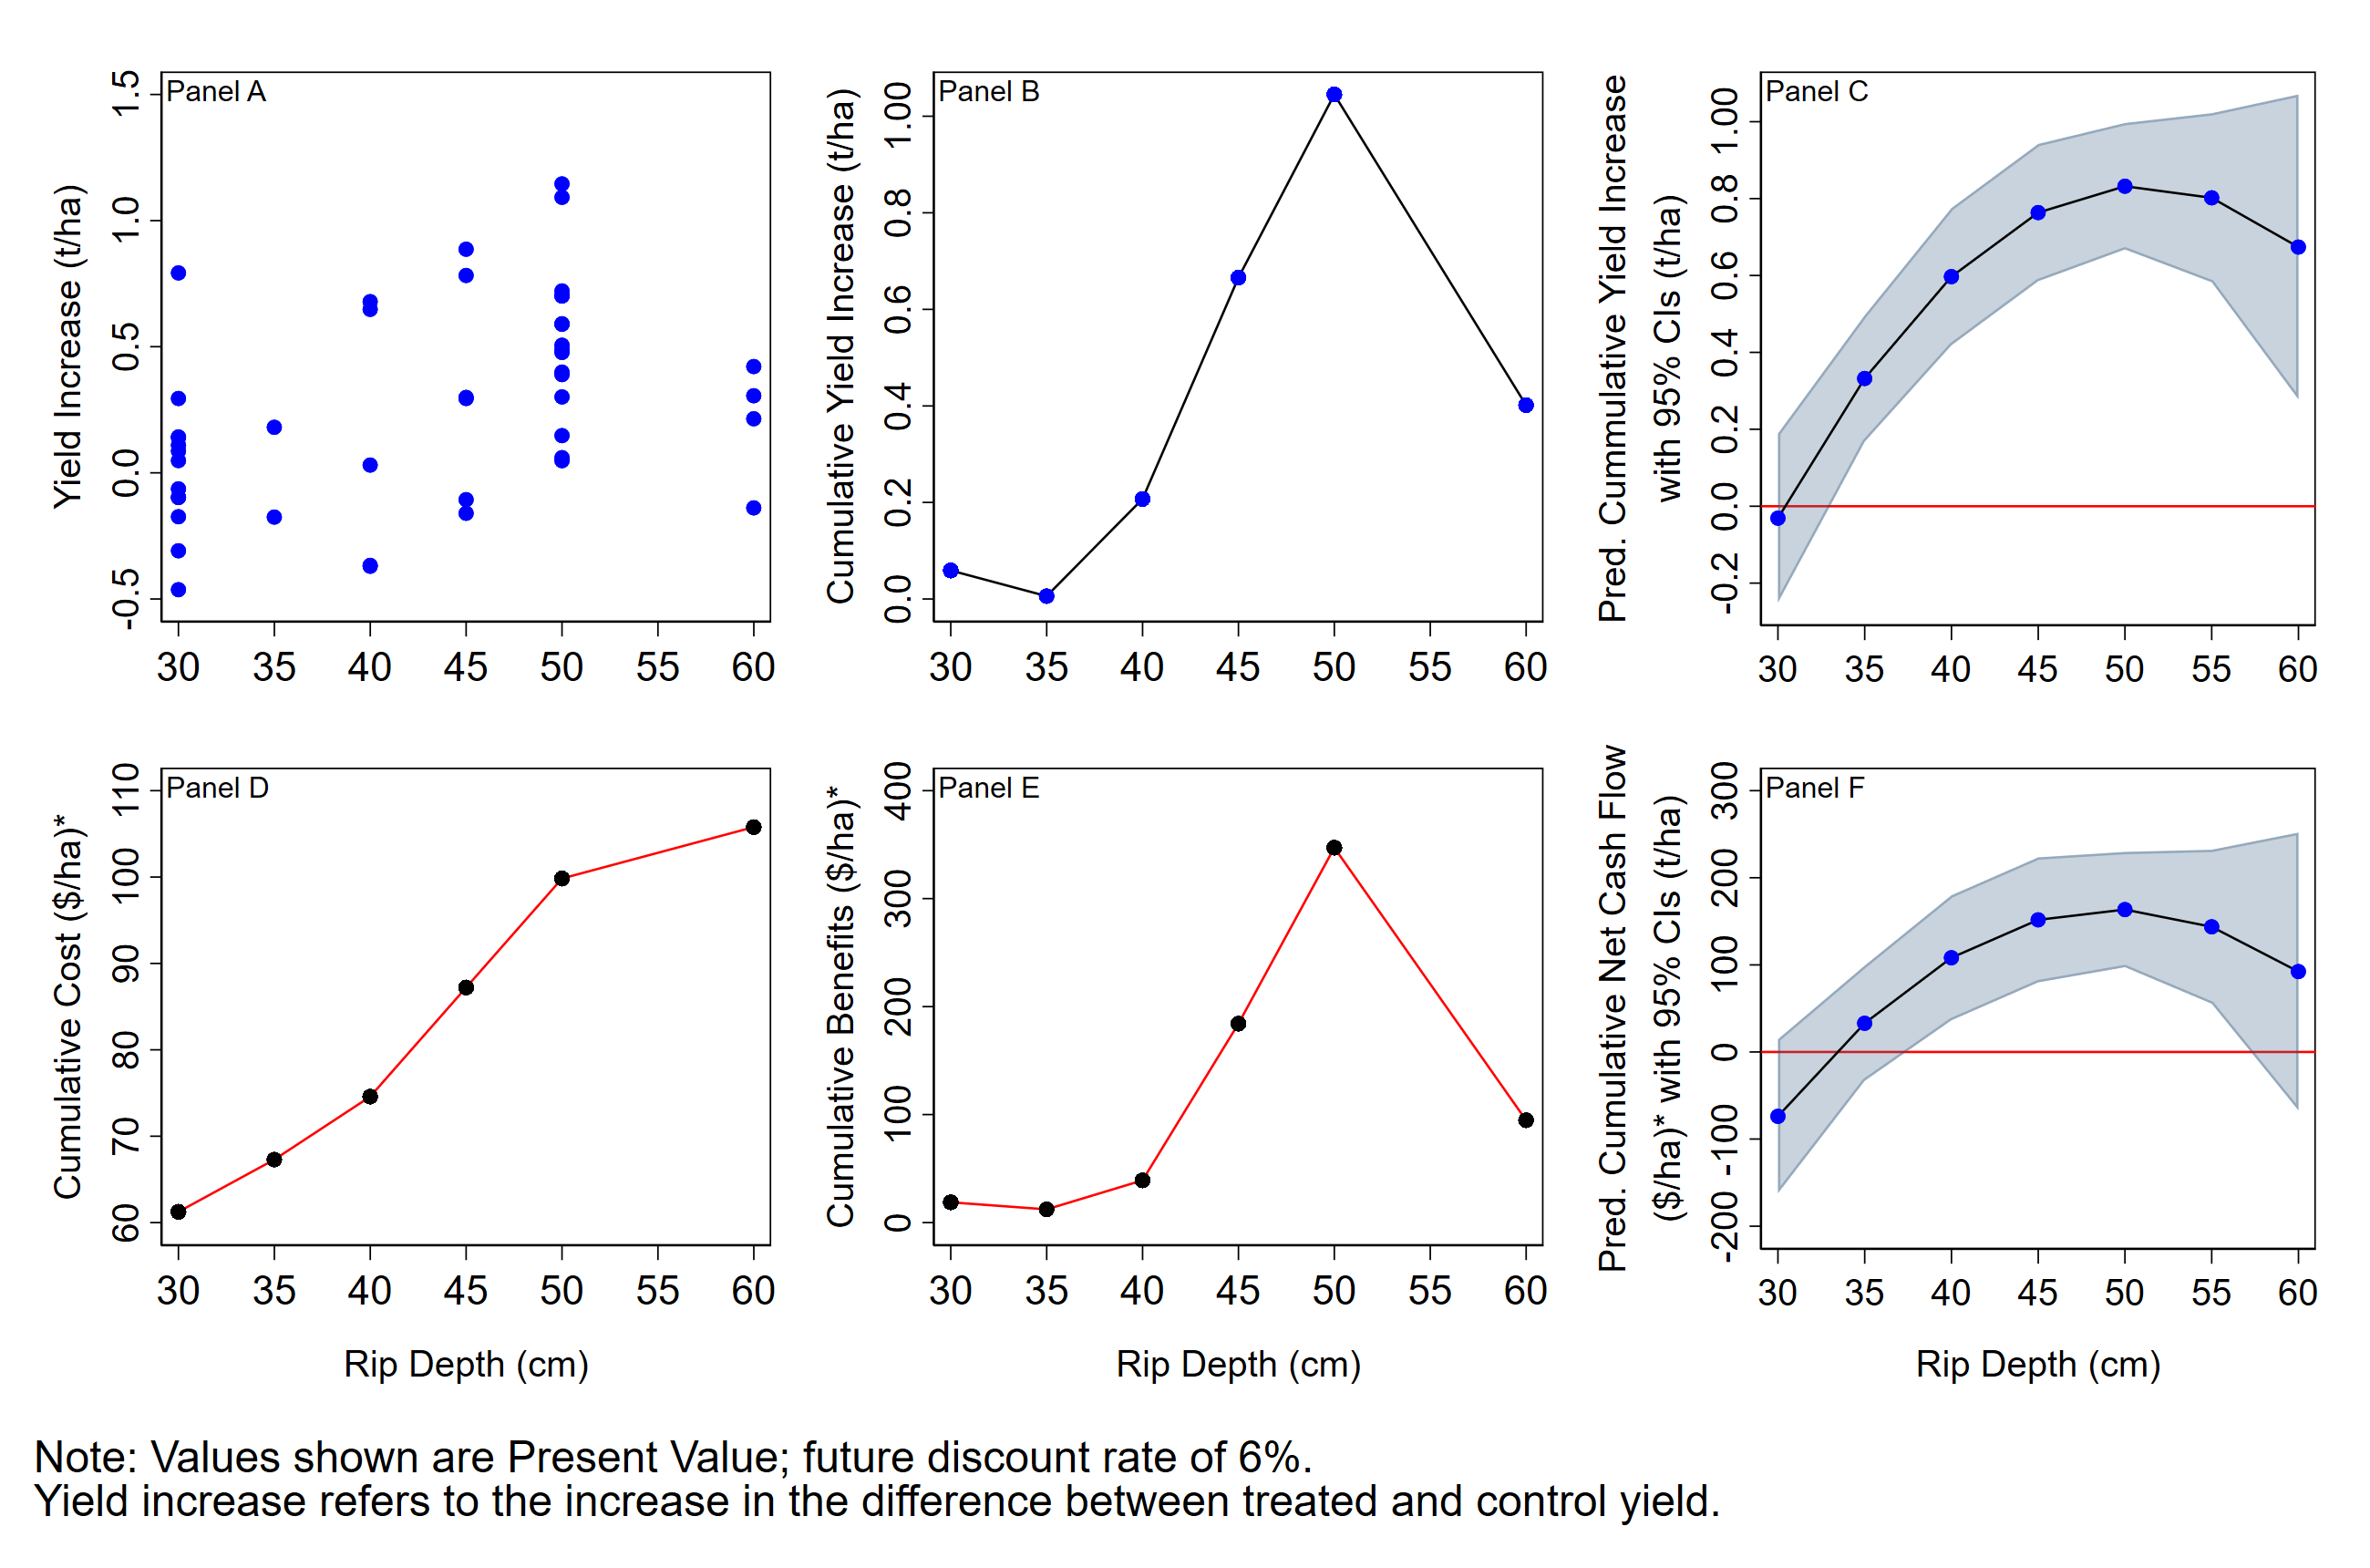 Figure 1. Panel A plots the yield increase (that is, the difference between treated and control yield) at various ripping depths. Panel B is the average 2-year cumulative yield response to each ripping depth. A non-linear regression of this relationship is shown in Panel C, where the shading represents the confidence interval and shows that there is less data for analysis at 60cm depth. Panel D and E show average cumulative discounted costs and benefits of different ripping depths. Panel F shows the cumulative discounted net cash flow mirrors the curvilinear yield relationship as given in Panel B and C. These relationships will continue to consolidate as the database accumulates the research program and 2021 yield data.